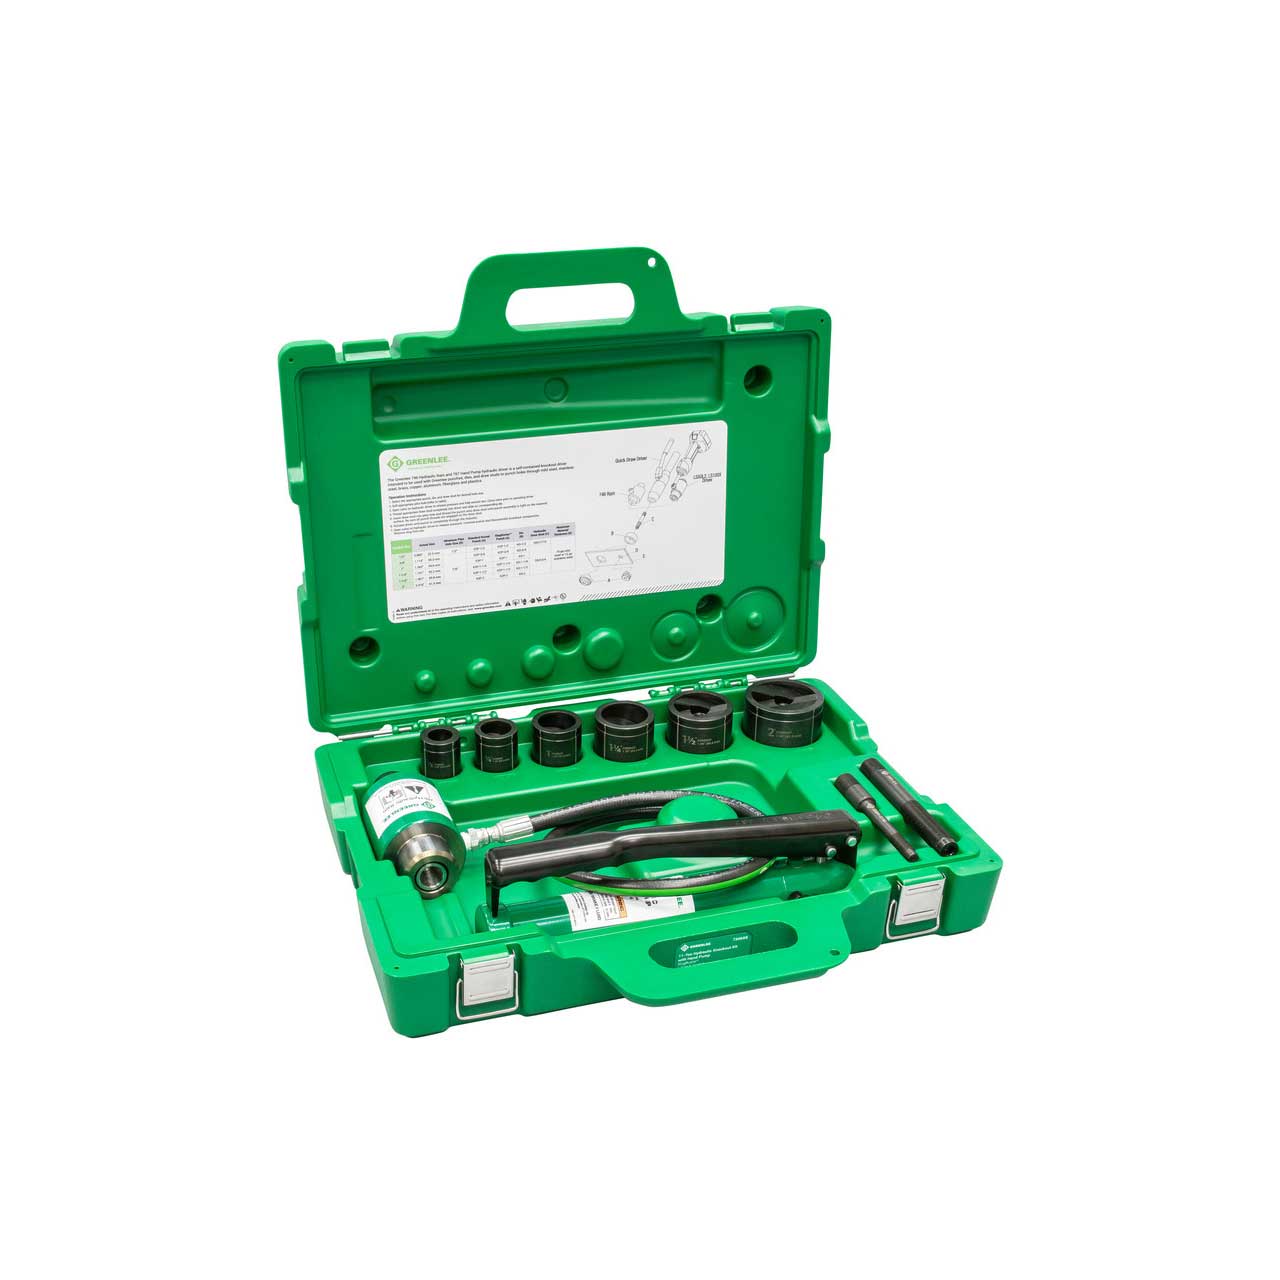 Greenlee 7306SB 11-Ton Hydraulic Knockout Kit with Hand Pump and